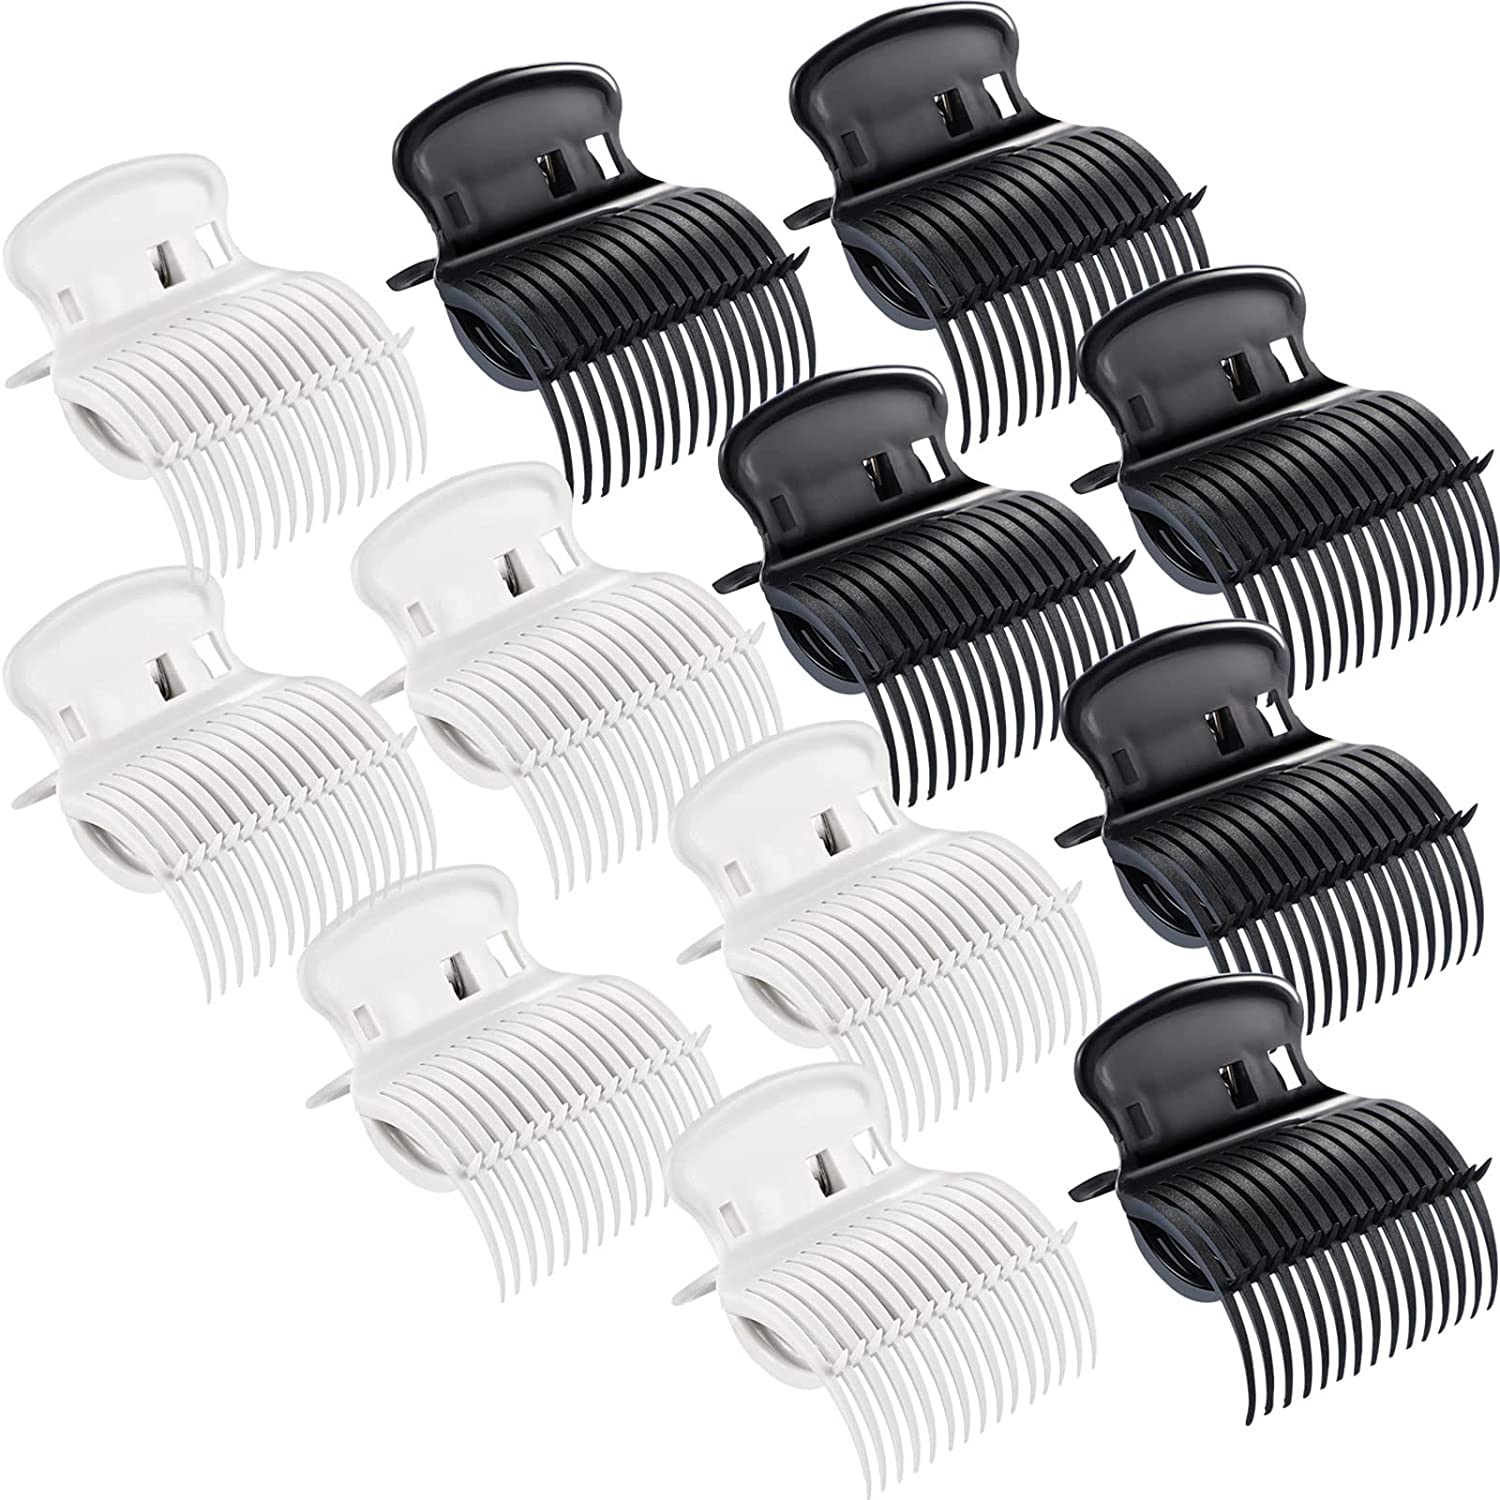 

12pcs/set Hot Roller Clips Hair Curler Claw Clips Hair Perm Insulation Clips Hair Section Styling Tools